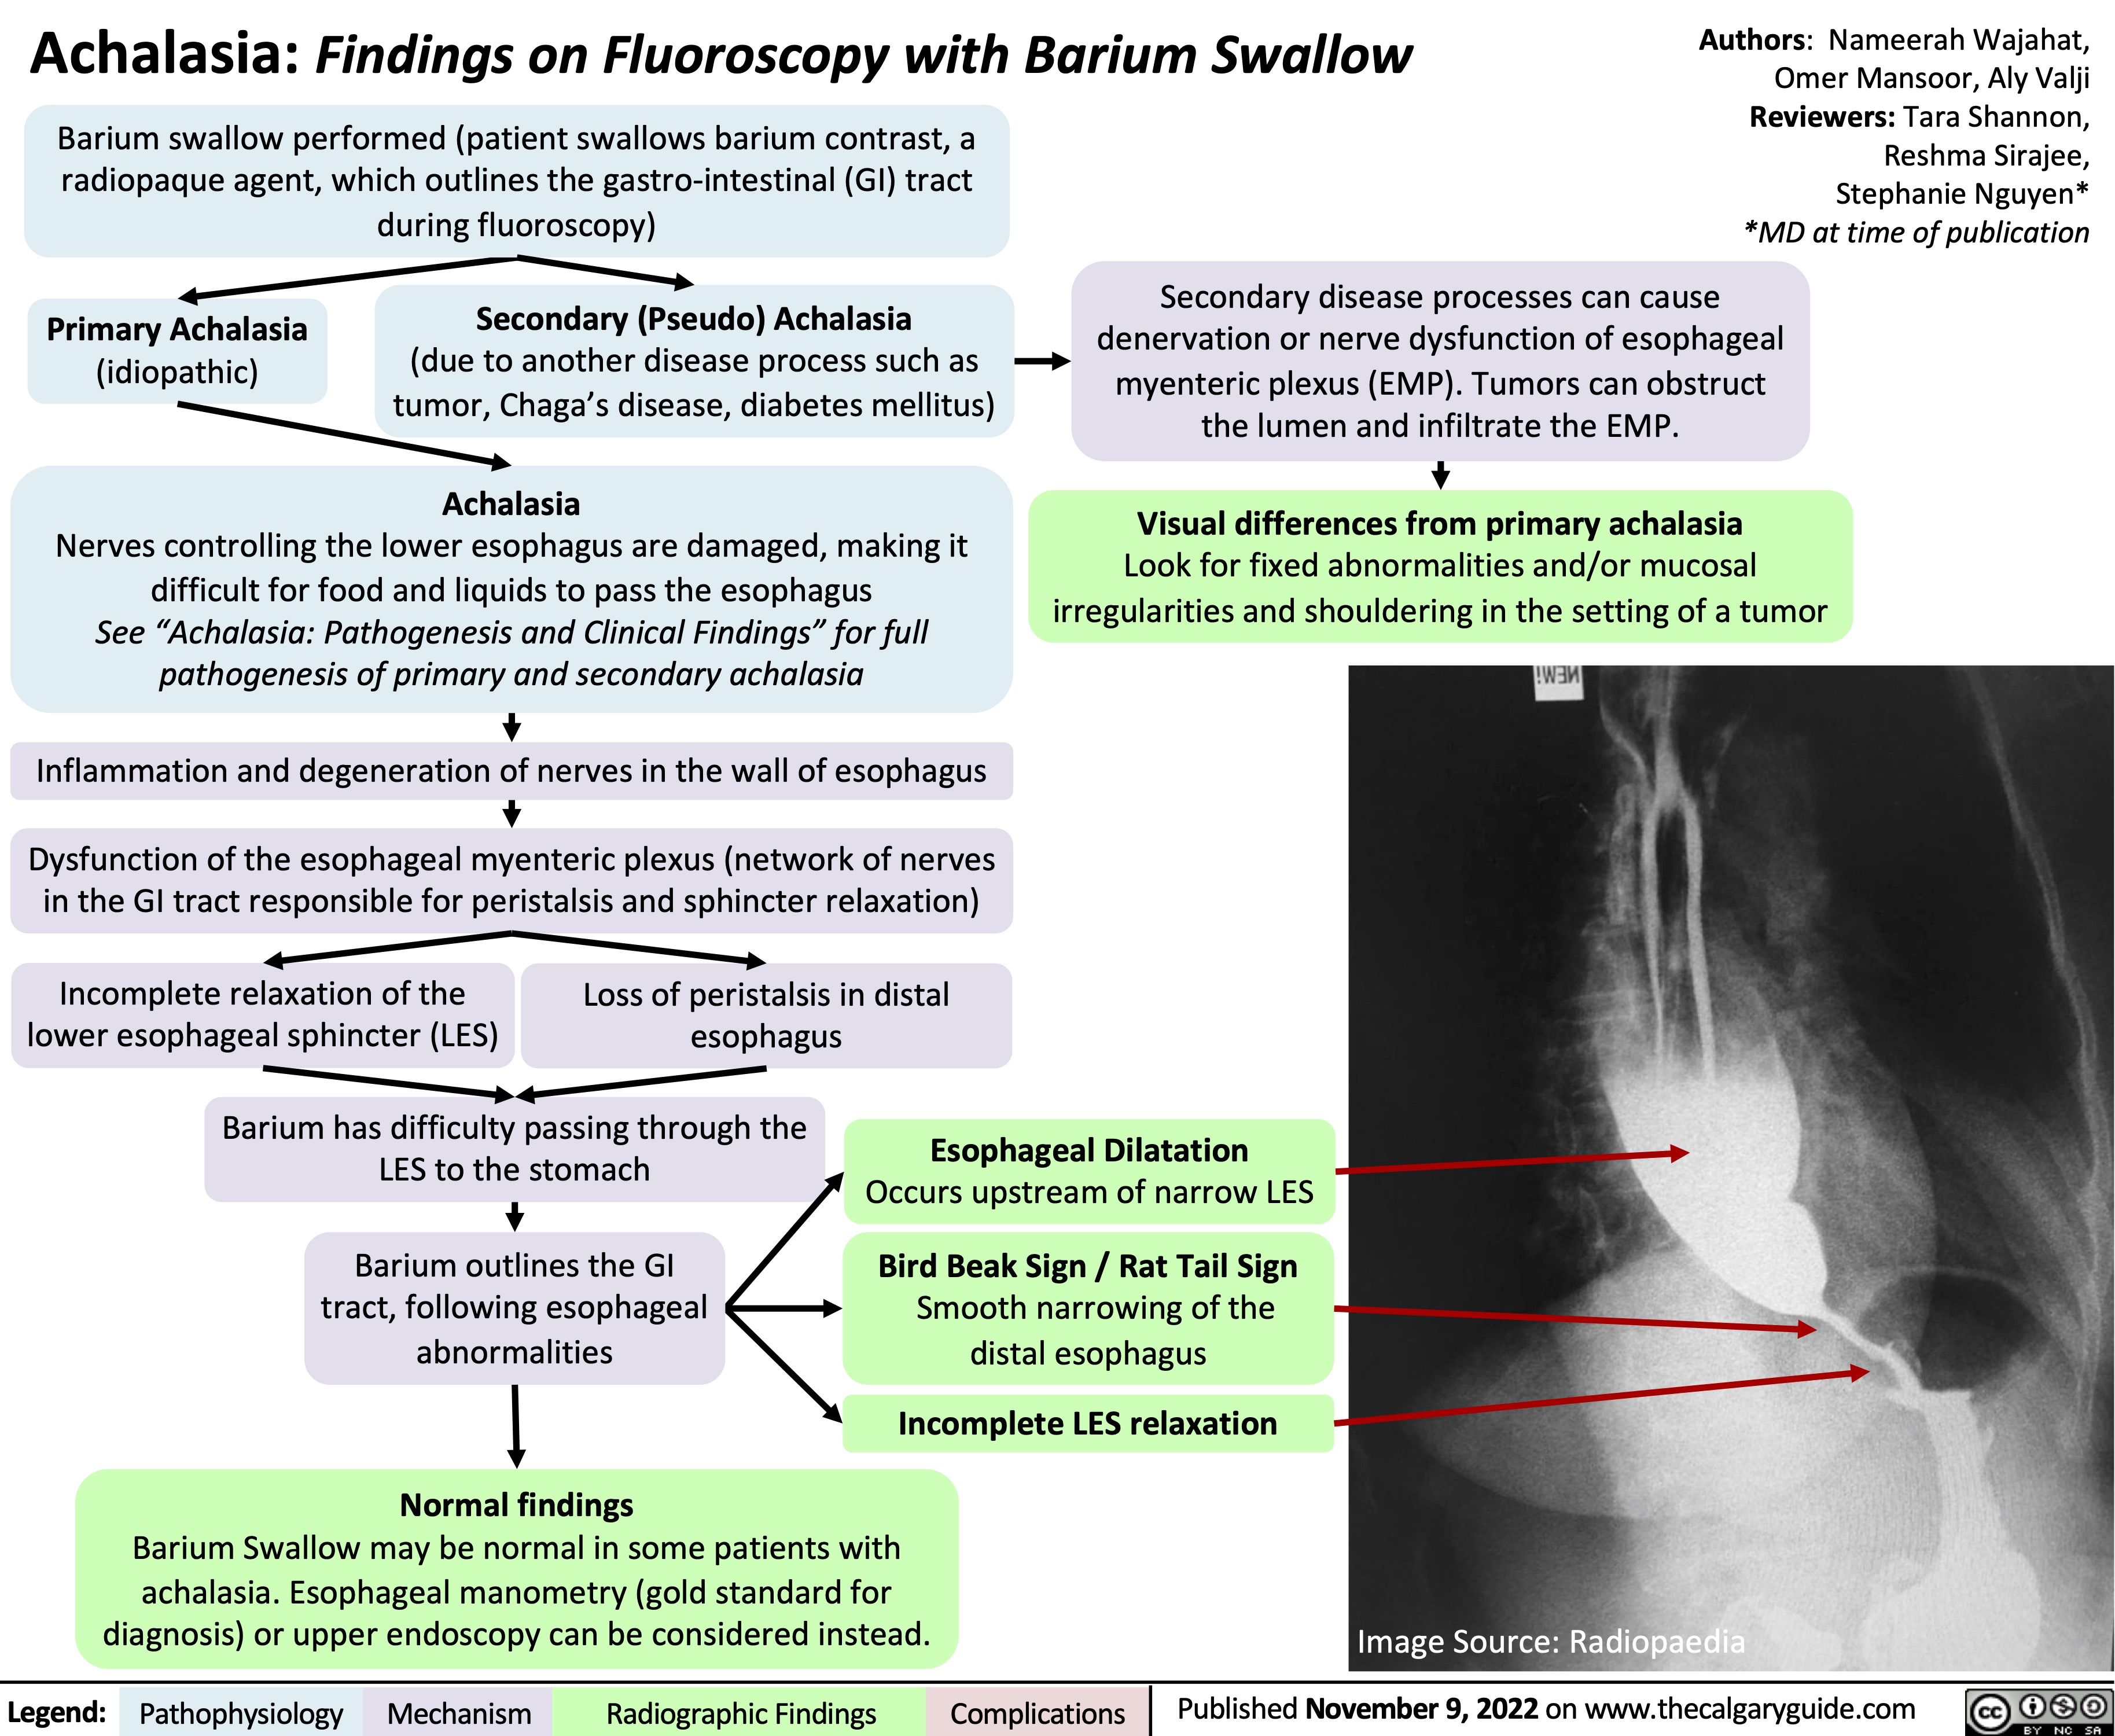 Achalasia: Findings on Fluoroscopy with Barium Swallow
Authors: Nameerah Wajahat, Omer Mansoor, Aly Valji Reviewers: Tara Shannon, Reshma Sirajee, Stephanie Nguyen* *MD at time of publication
 Barium swallow performed (patient swallows barium contrast, a radiopaque agent, which outlines the gastro-intestinal (GI) tract during fluoroscopy)
    Primary Achalasia
(idiopathic)
Secondary (Pseudo) Achalasia
(due to another disease process such as tumor, Chaga’s disease, diabetes mellitus)
Achalasia
Secondary disease processes can cause denervation or nerve dysfunction of esophageal myenteric plexus (EMP). Tumors can obstruct the lumen and infiltrate the EMP.
Visual differences from primary achalasia
Look for fixed abnormalities and/or mucosal irregularities and shouldering in the setting of a tumor
   Nerves controlling the lower esophagus are damaged, making it difficult for food and liquids to pass the esophagus
See “Achalasia: Pathogenesis and Clinical Findings” for full pathogenesis of primary and secondary achalasia
Inflammation and degeneration of nerves in the wall of esophagus
Dysfunction of the esophageal myenteric plexus (network of nerves in the GI tract responsible for peristalsis and sphincter relaxation)
Incomplete relaxation of the Loss of peristalsis in distal lower esophageal sphincter (LES) esophagus
          Barium has difficulty passing through the LES to the stomach
Barium outlines the GI tract, following esophageal abnormalities
Normal findings
Esophageal Dilatation
Occurs upstream of narrow LES
Bird Beak Sign / Rat Tail Sign
Smooth narrowing of the distal esophagus
Incomplete LES relaxation
        Barium Swallow may be normal in some patients with achalasia. Esophageal manometry (gold standard for diagnosis) or upper endoscopy can be considered instead.
Image Source: Radiopaedia
 Legend:
 Pathophysiology
Mechanism
Radiographic Findings
 Complications
Published November 9, 2022 on www.thecalgaryguide.com
    